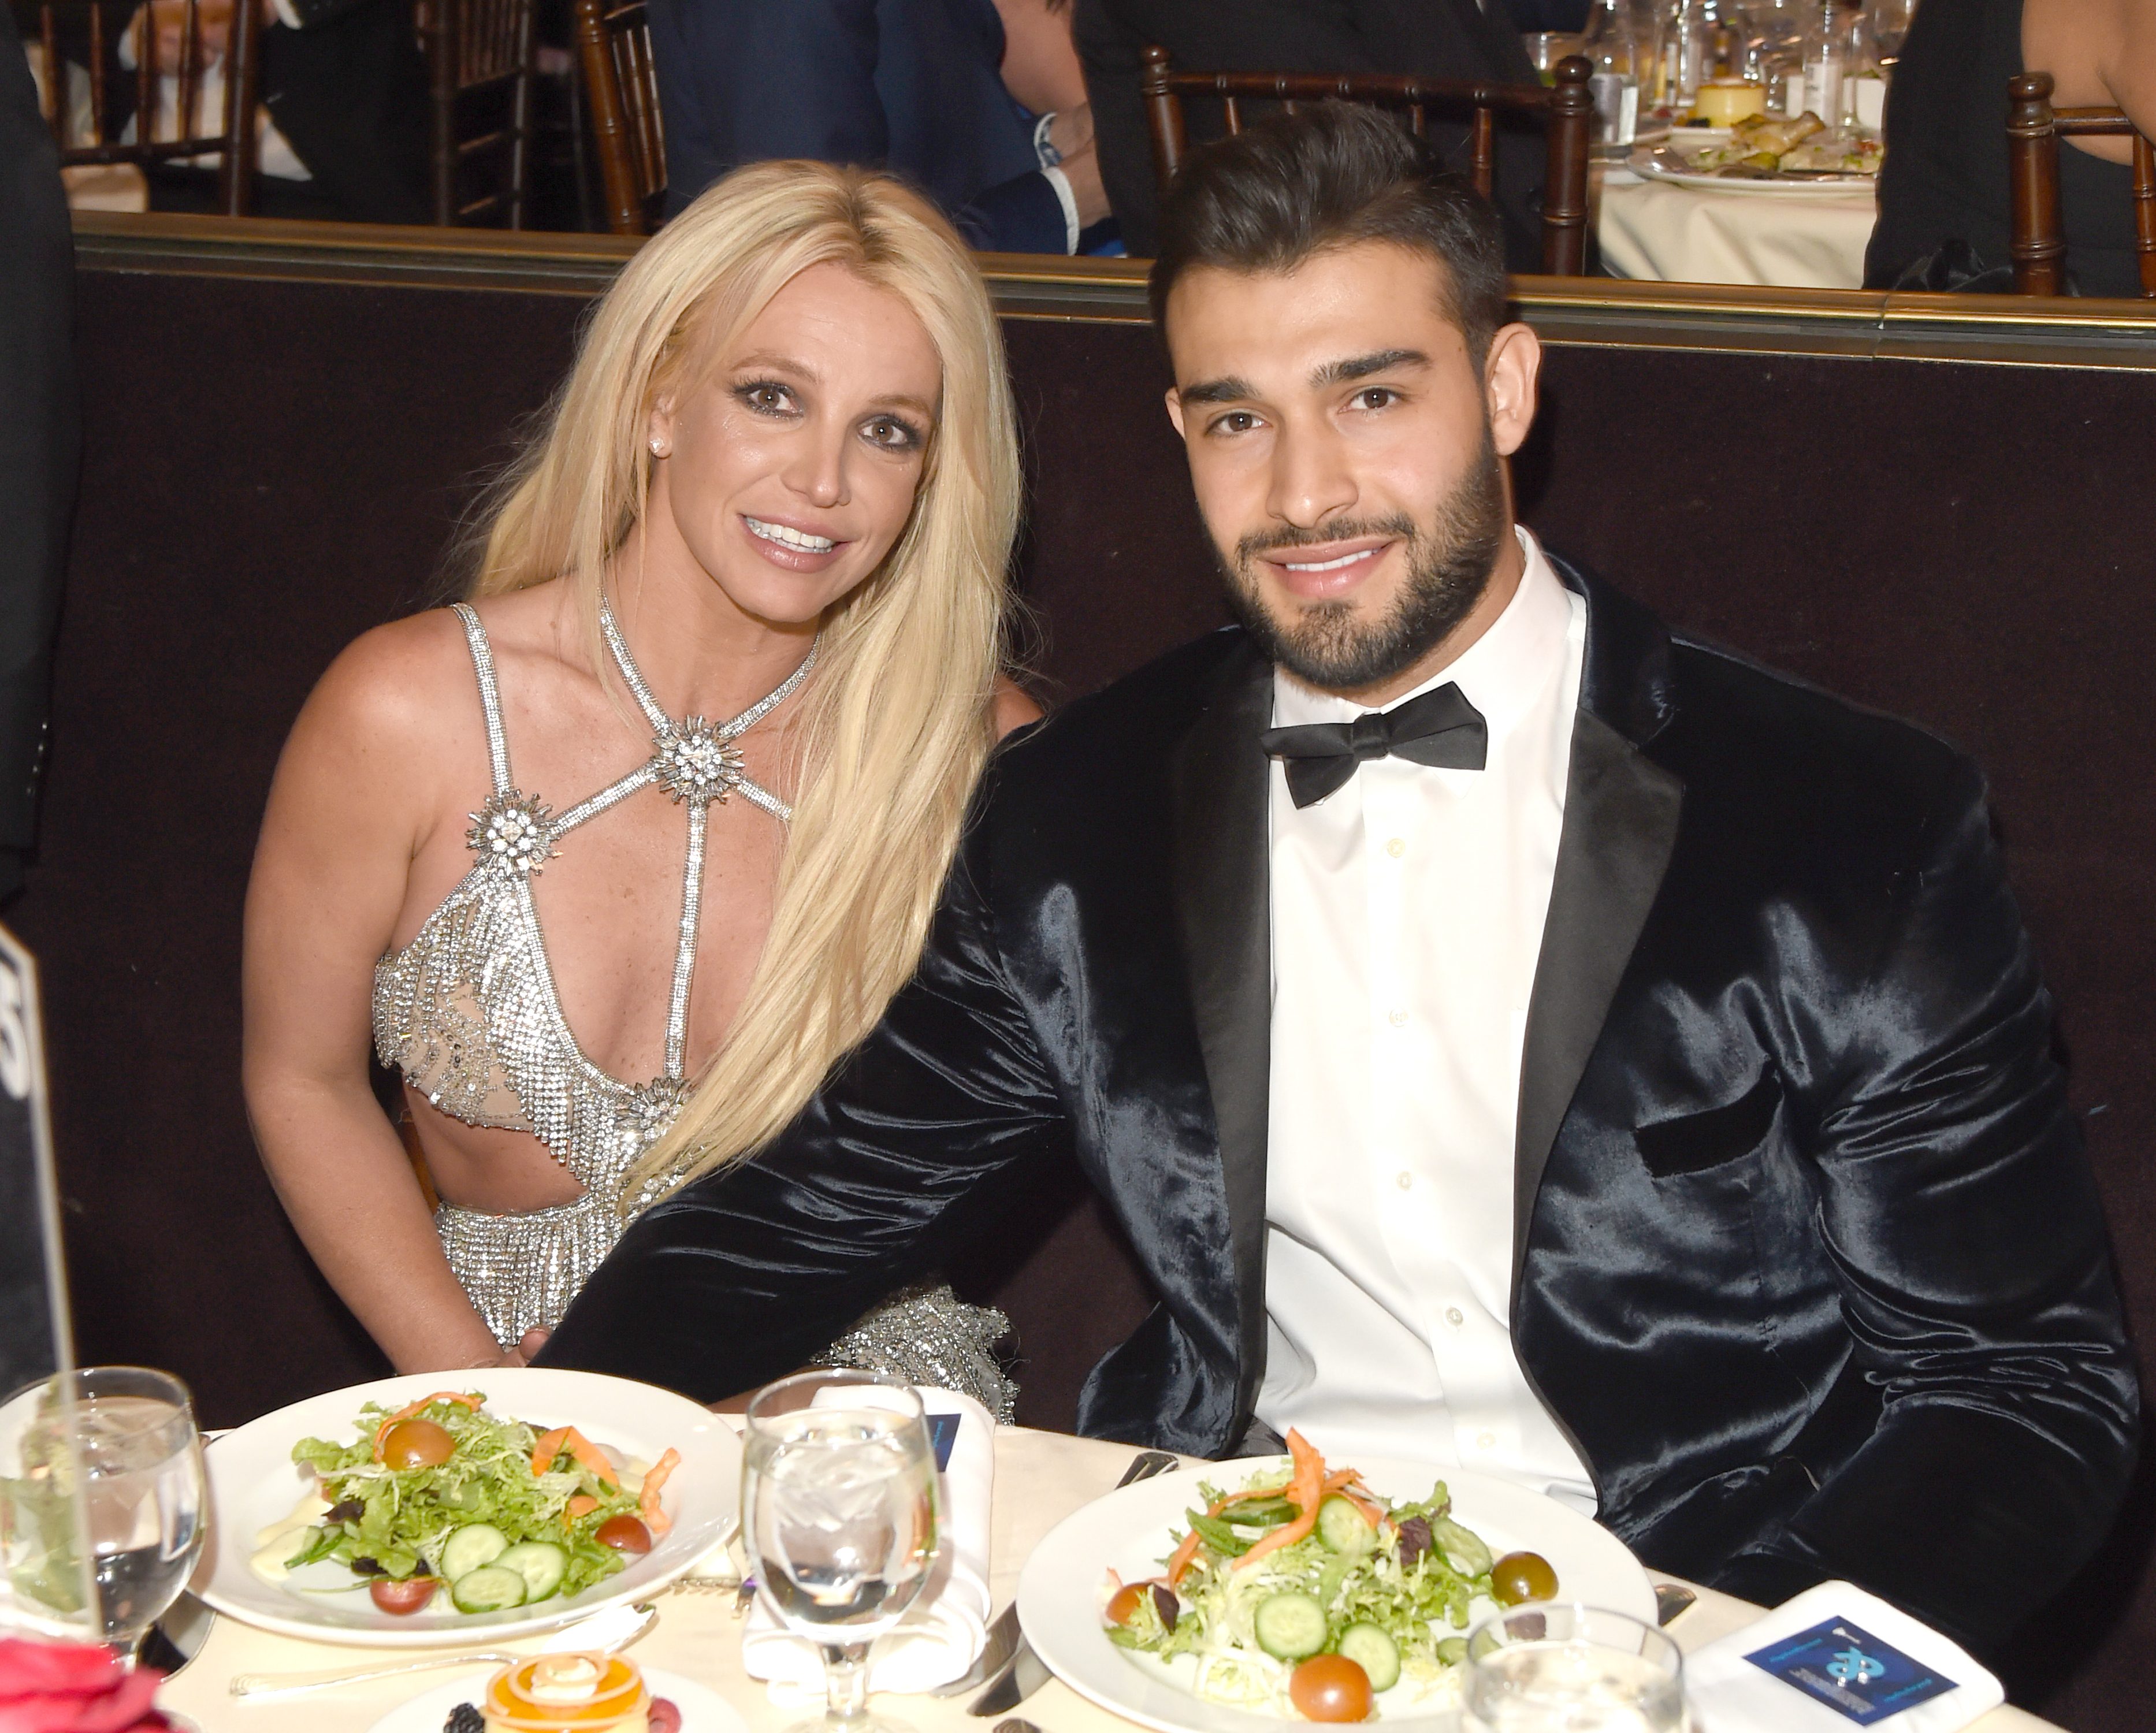 Britney Spears and Sam Asghari at a dinner table